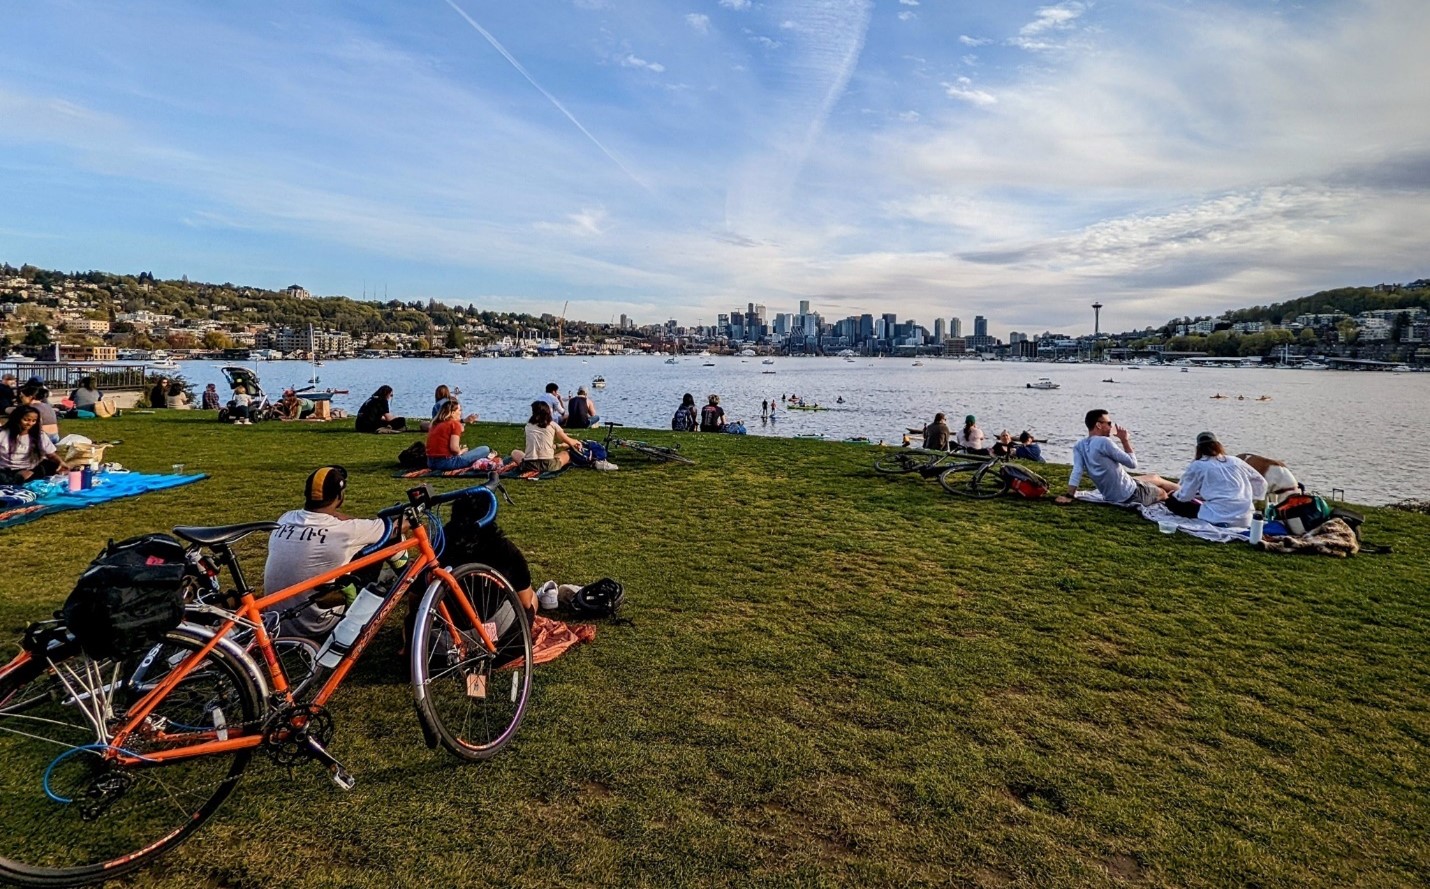 Several people sitting a large grassy hill overlooking a large body of water and a cityscape on a partly sunny day.